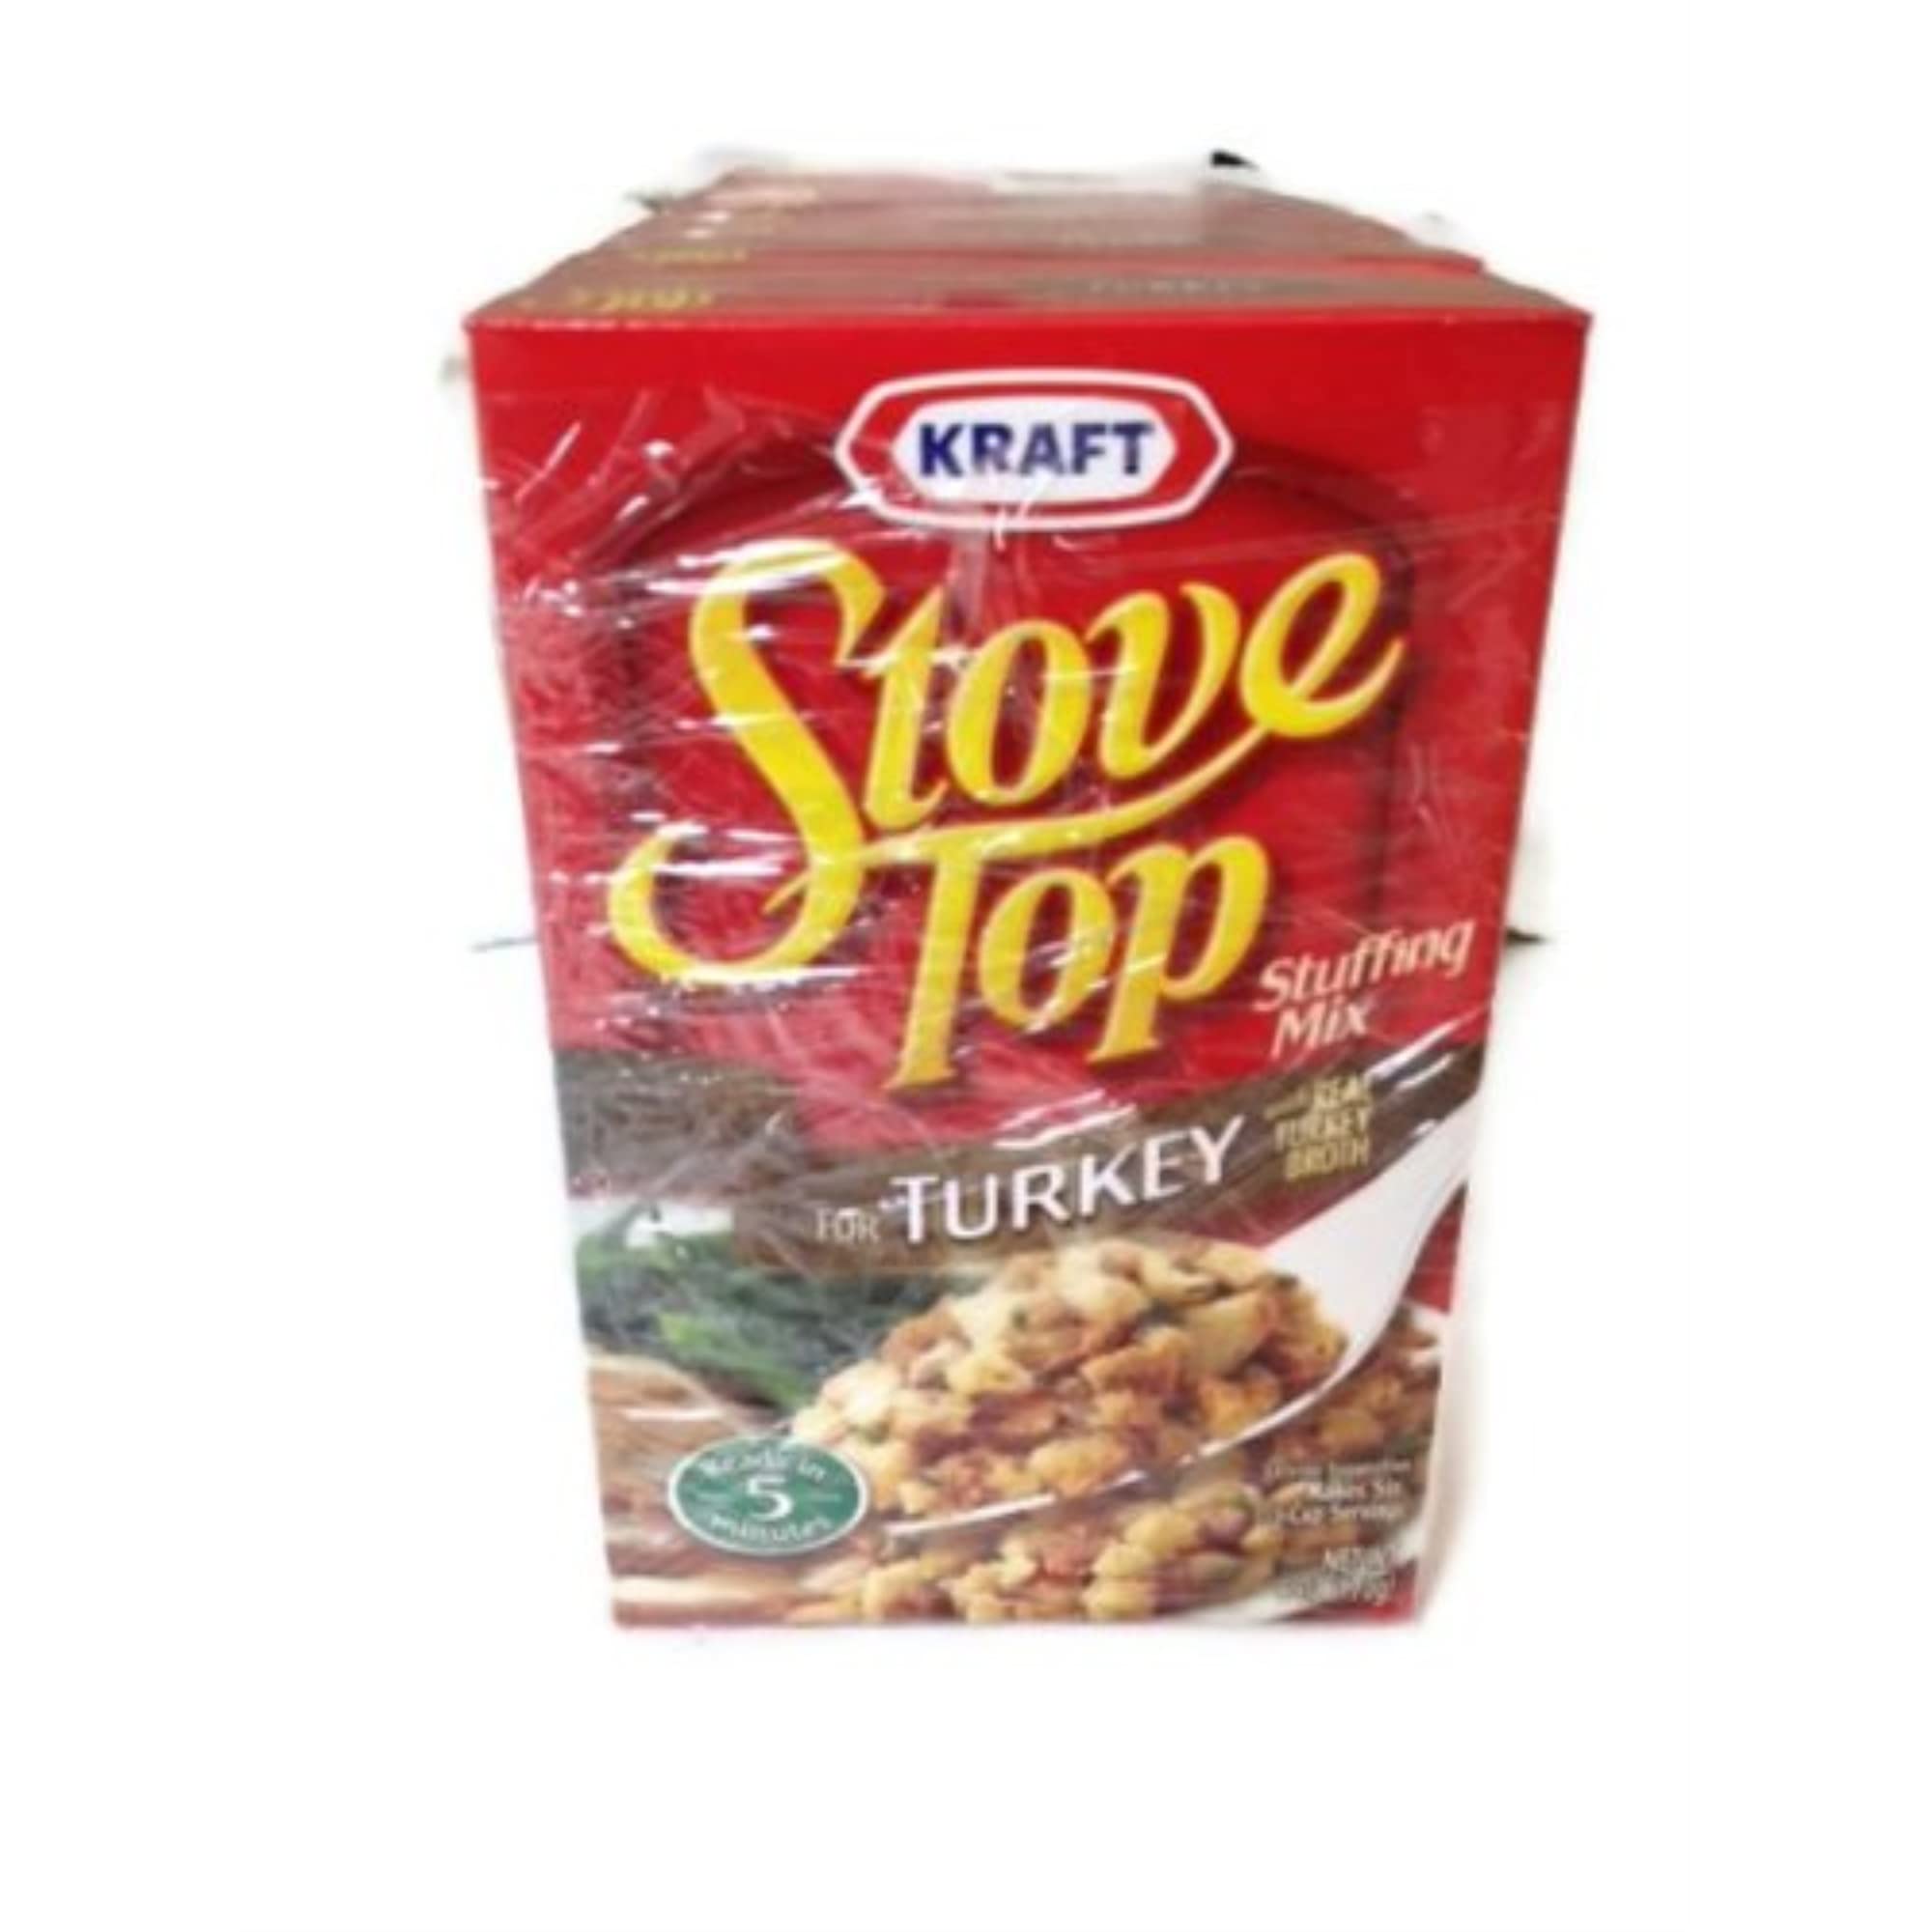 Stove Top Stuffing Mix, For Turkey - 6 oz